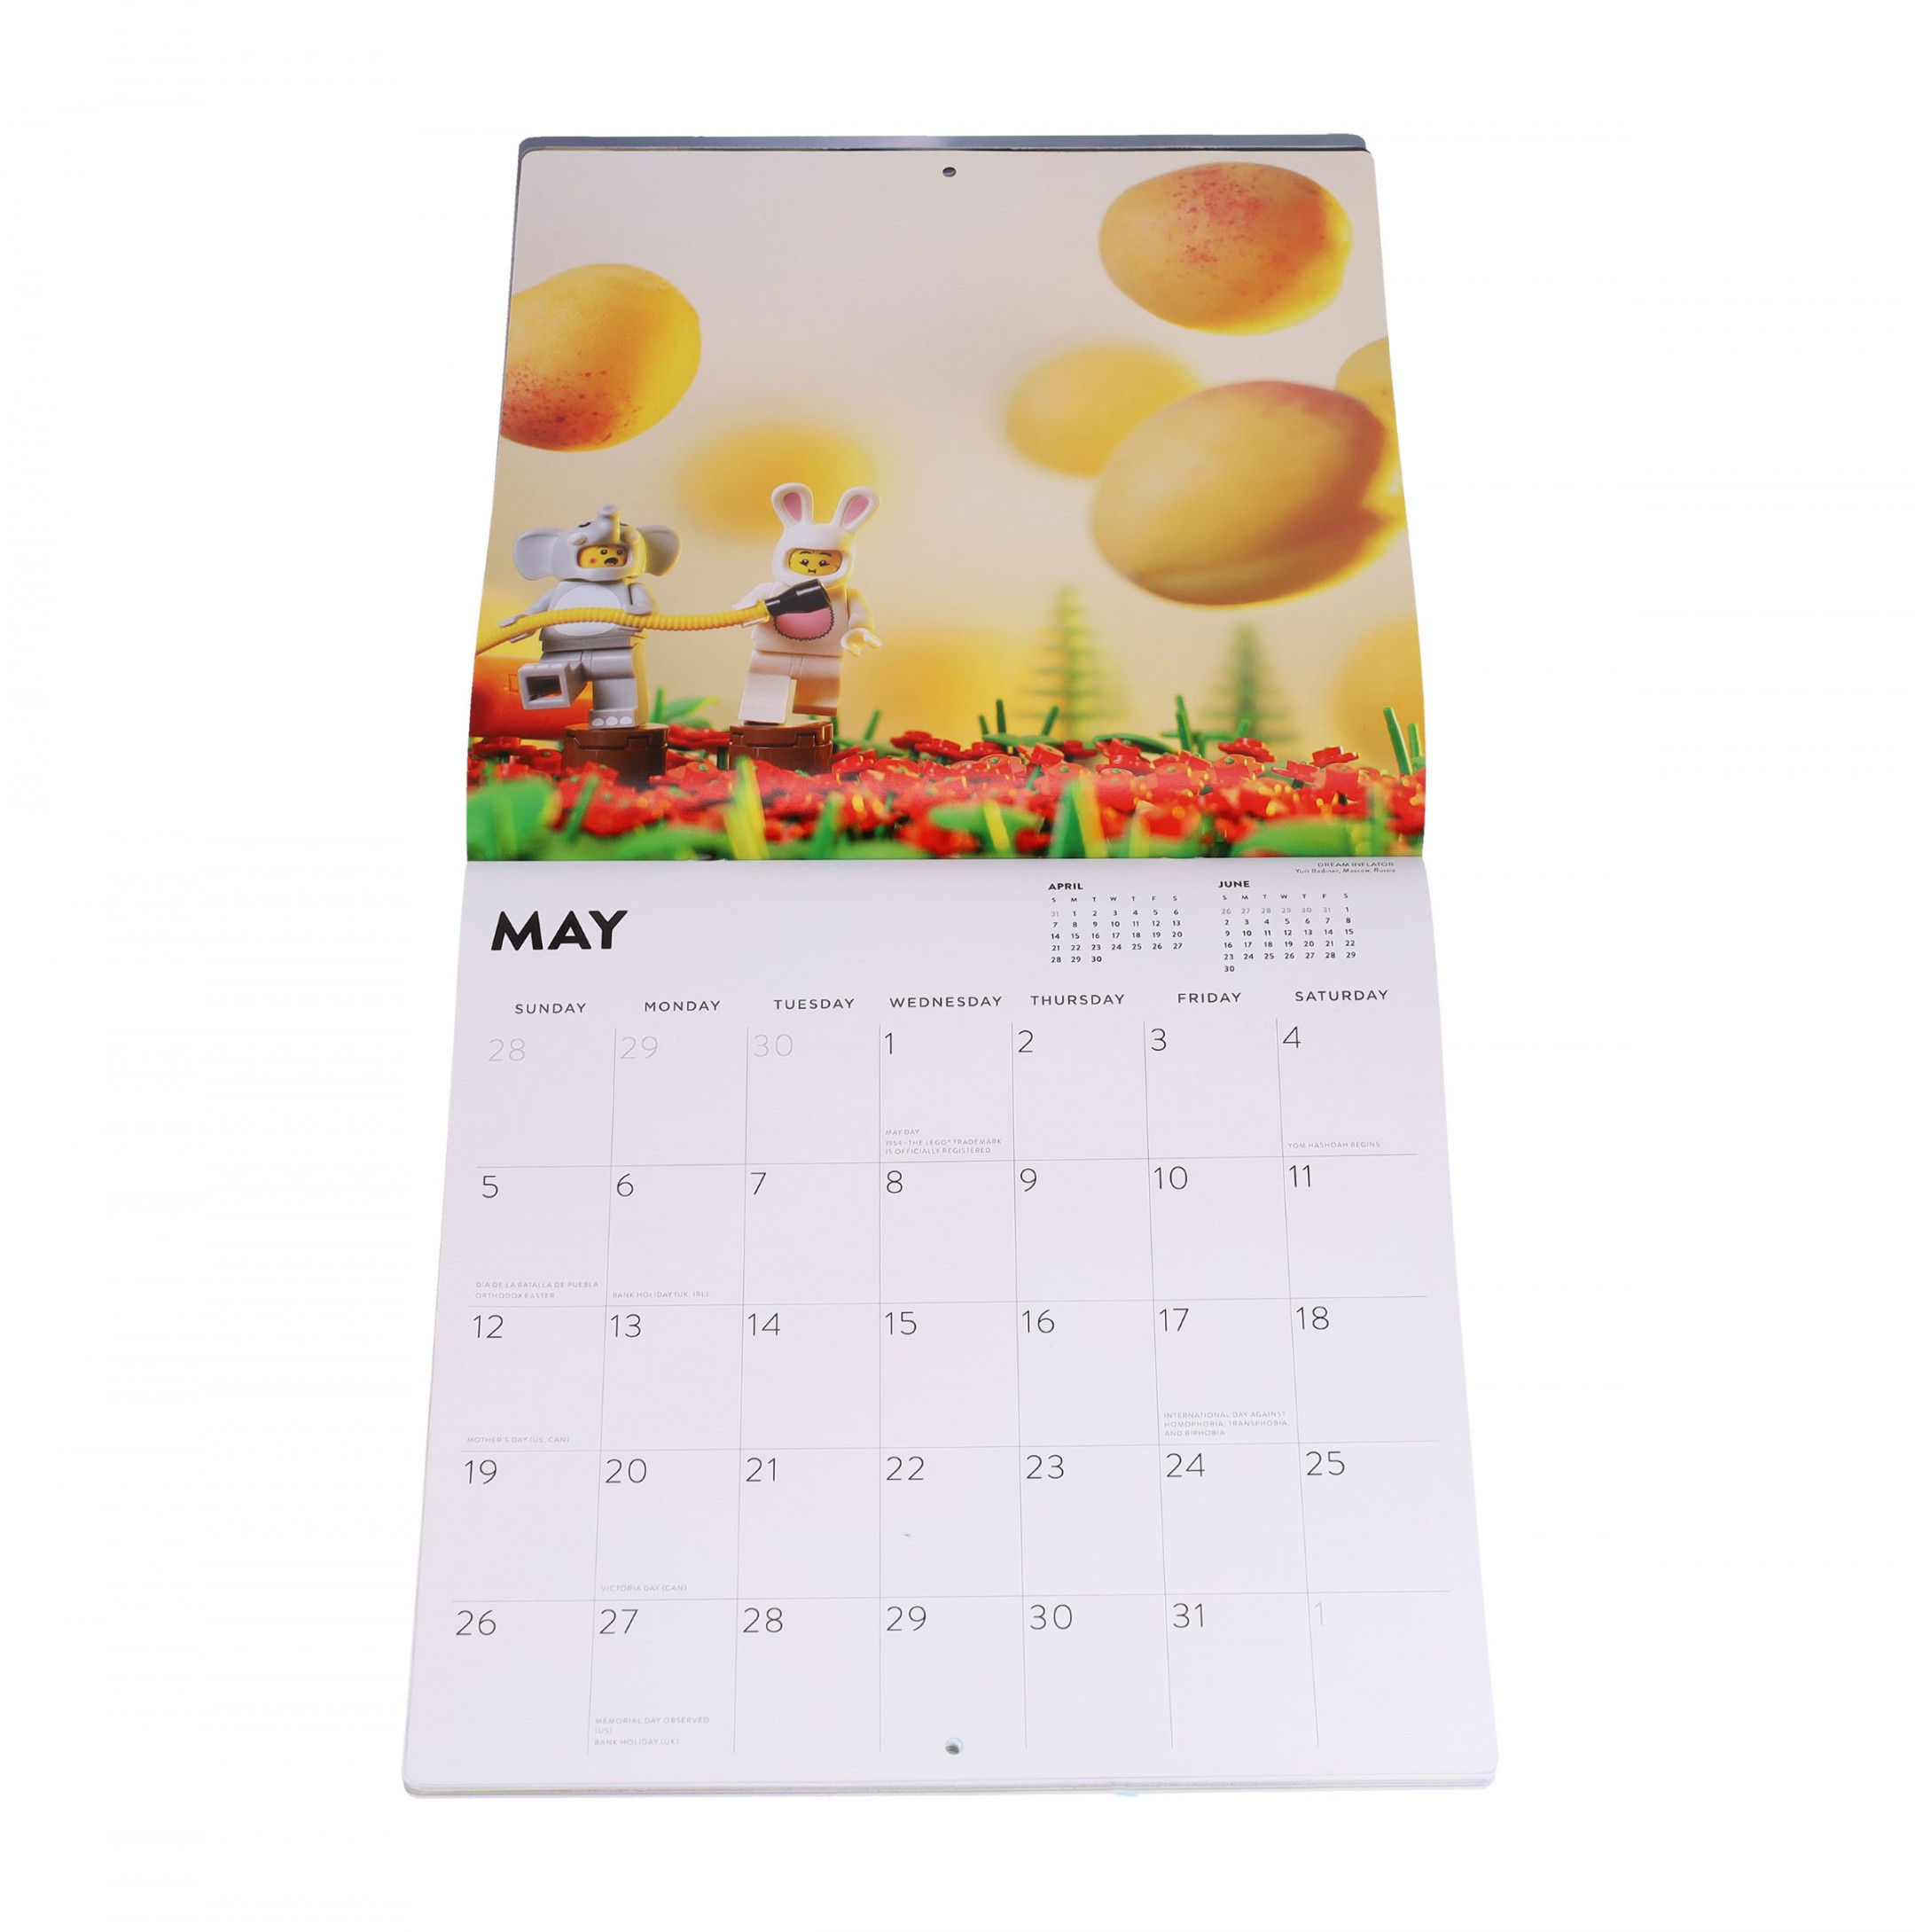 LEGO®  Wall Calendar   Other  Buy online at the Official LEGO®  Shop US